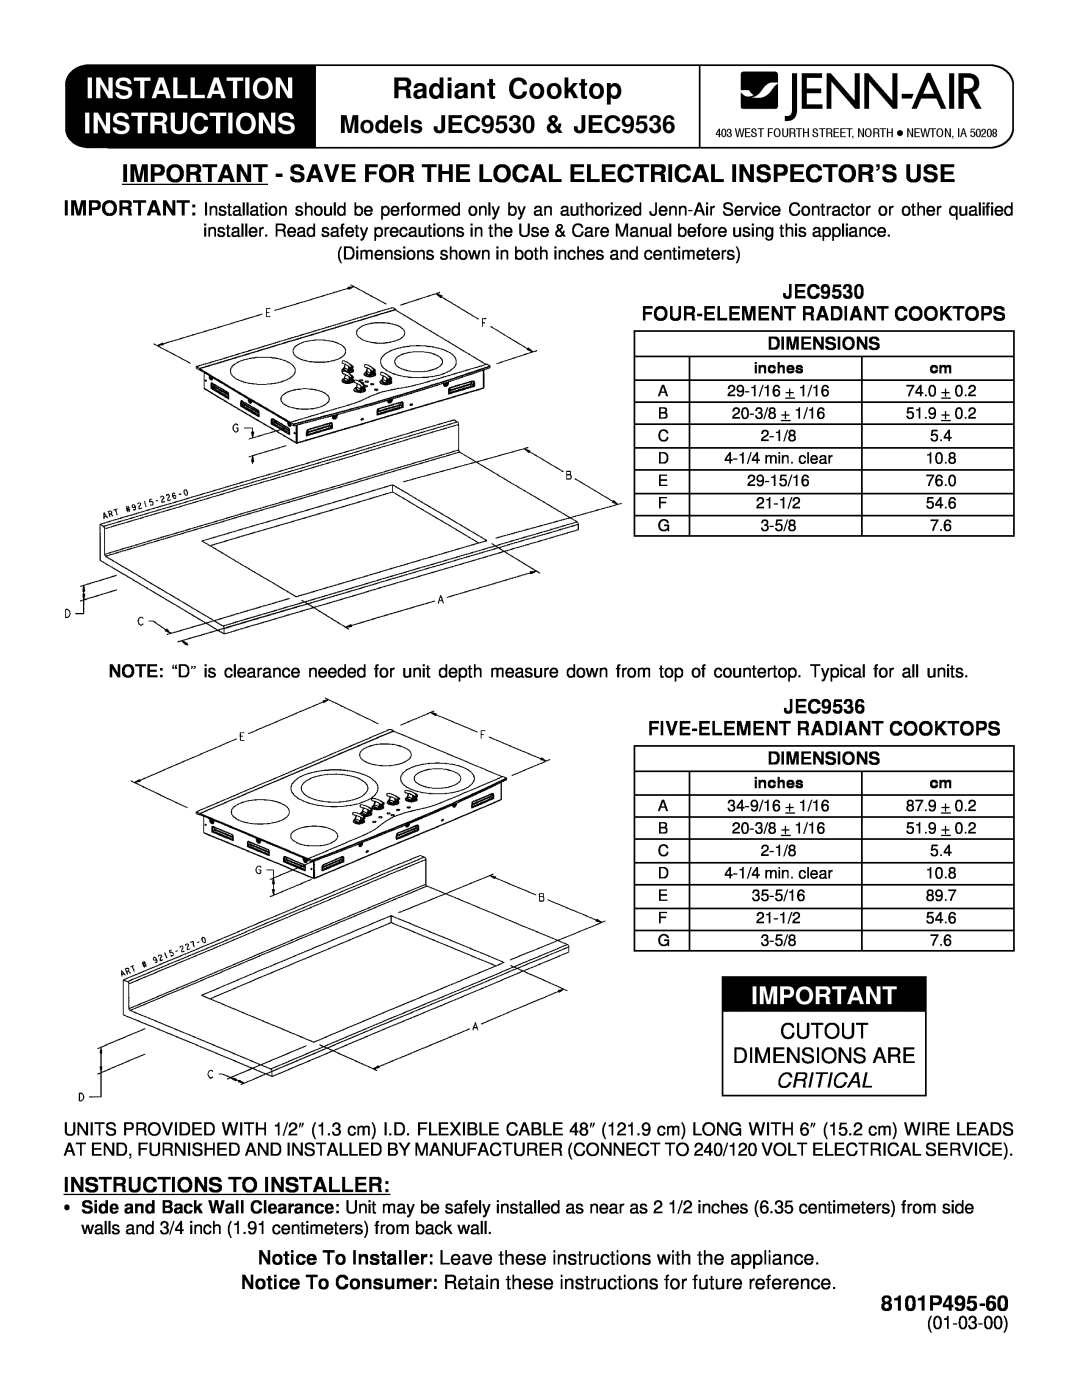 Jenn-Air installation instructions Installation Instructions, Models JEC9530 & JEC9536, Cutout Dimensions Are, Critical 